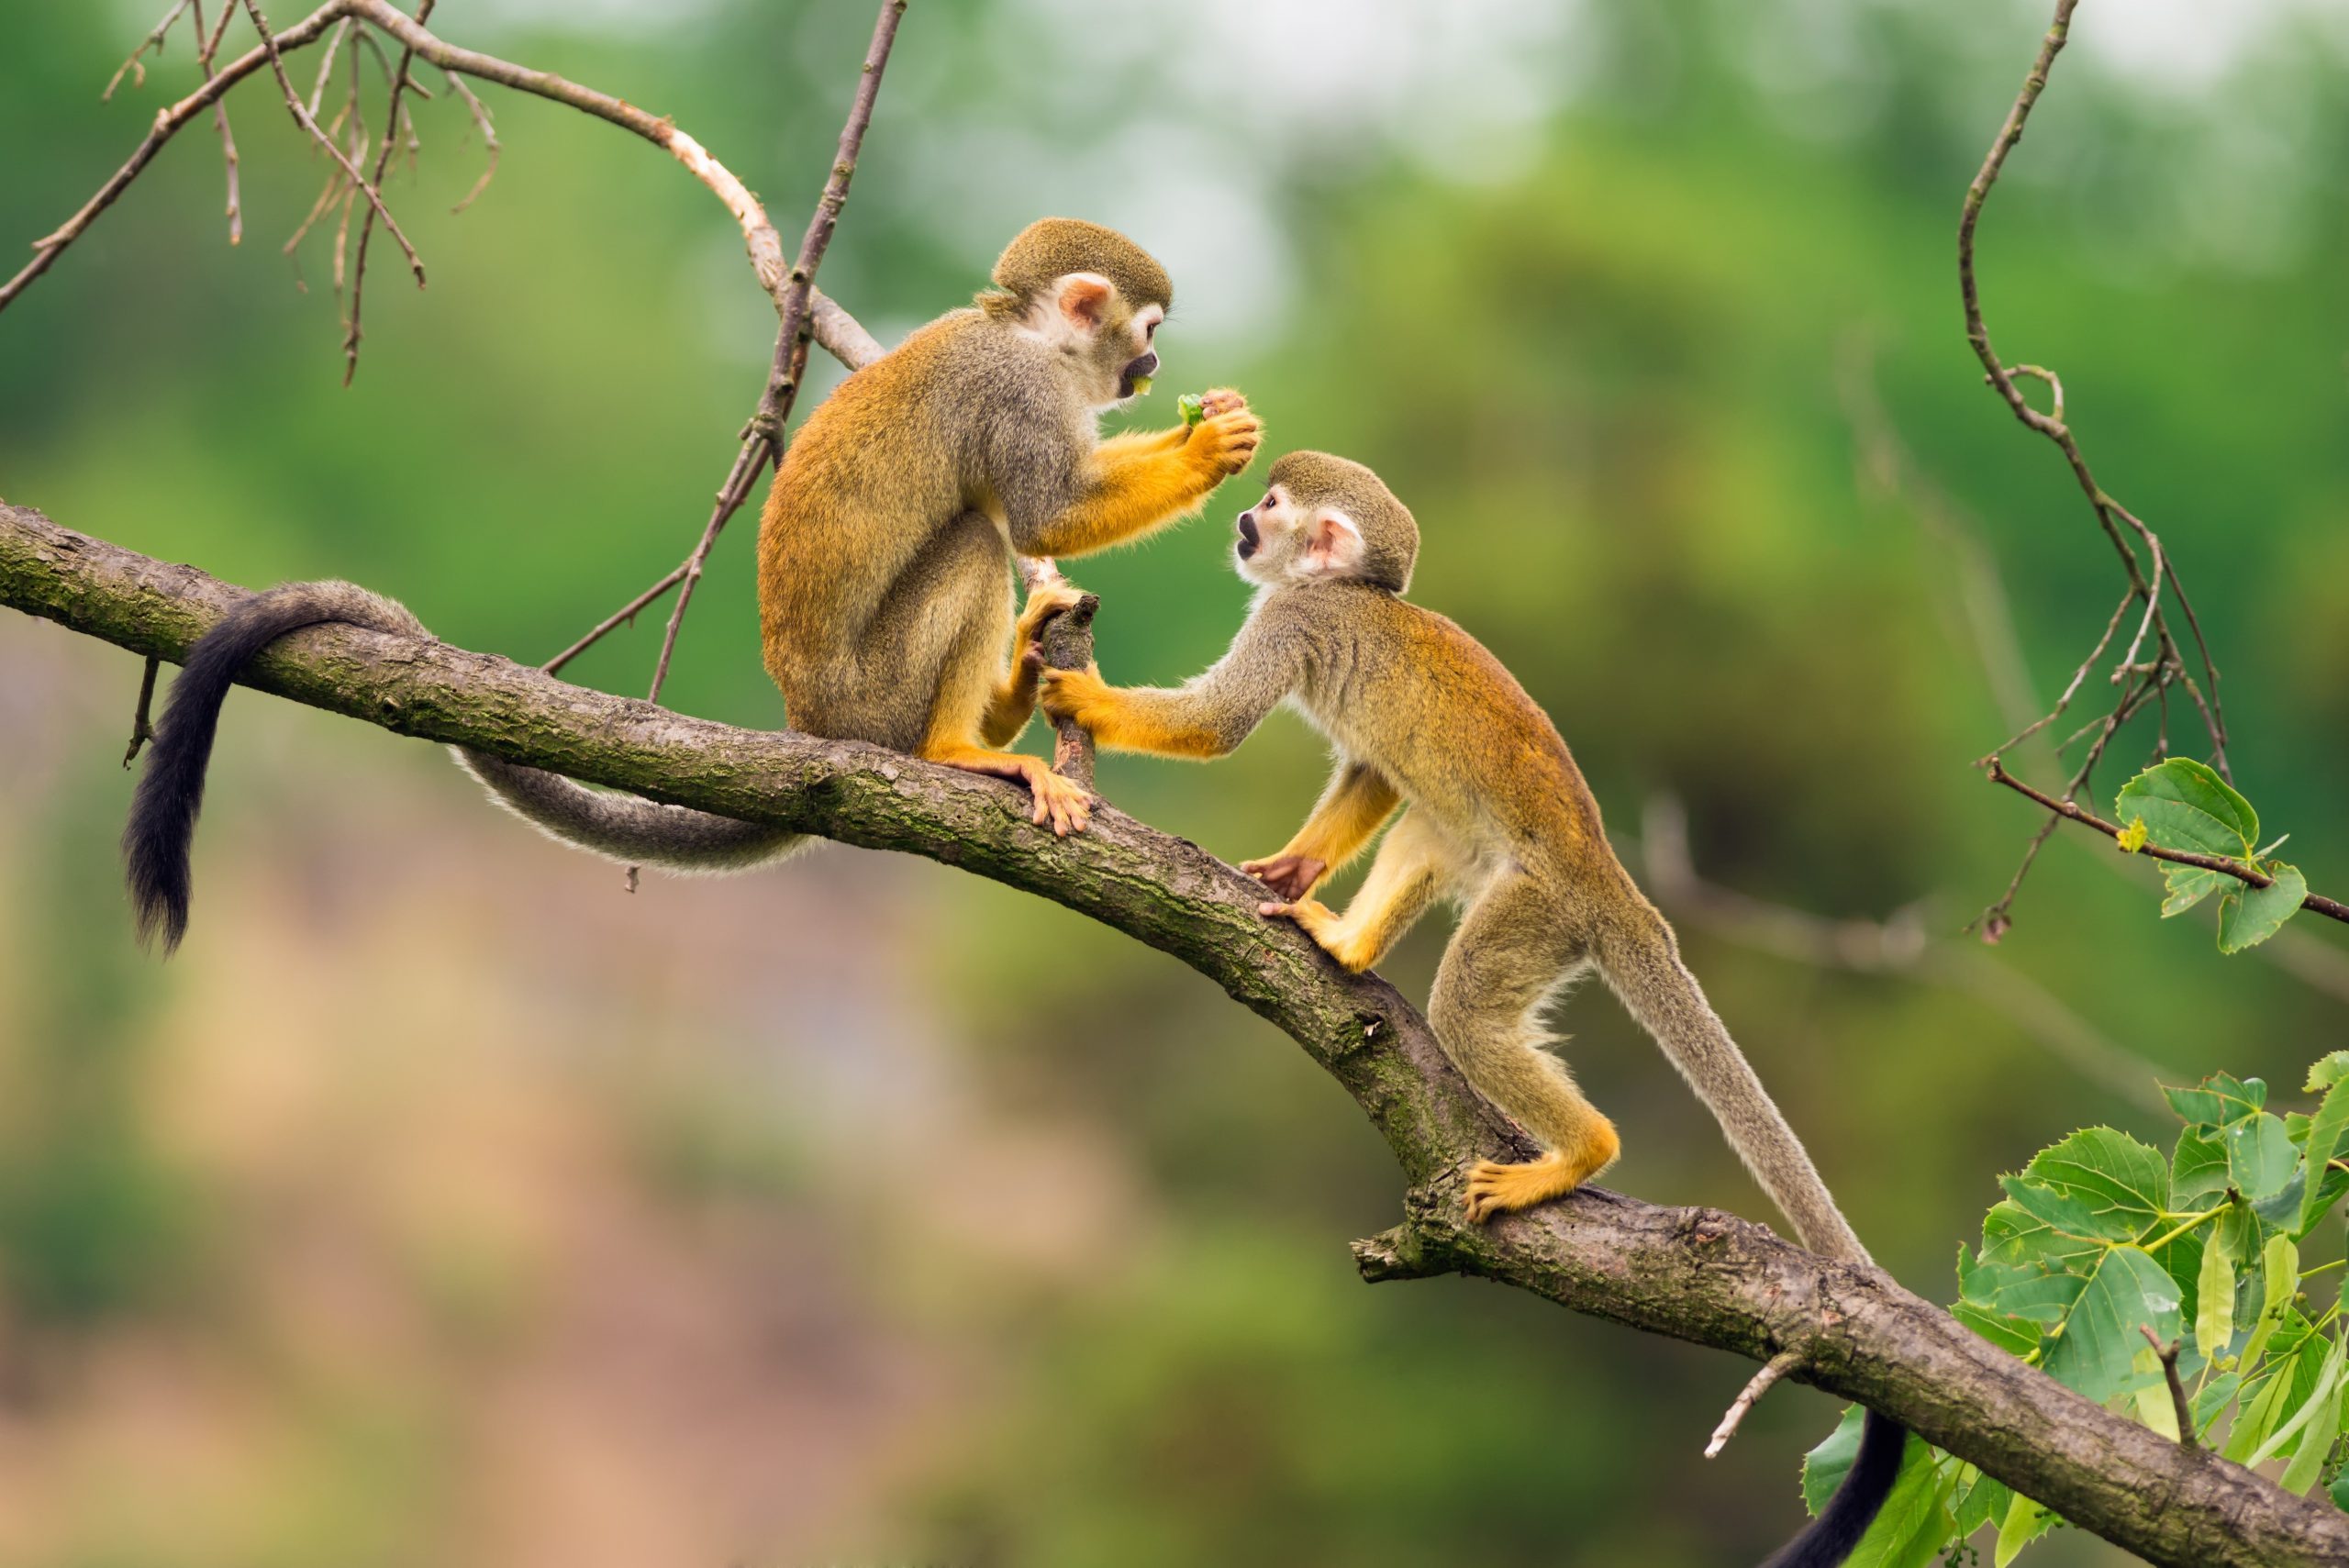 How Many Types Monkeys Are There in the World? | Reader's Digest